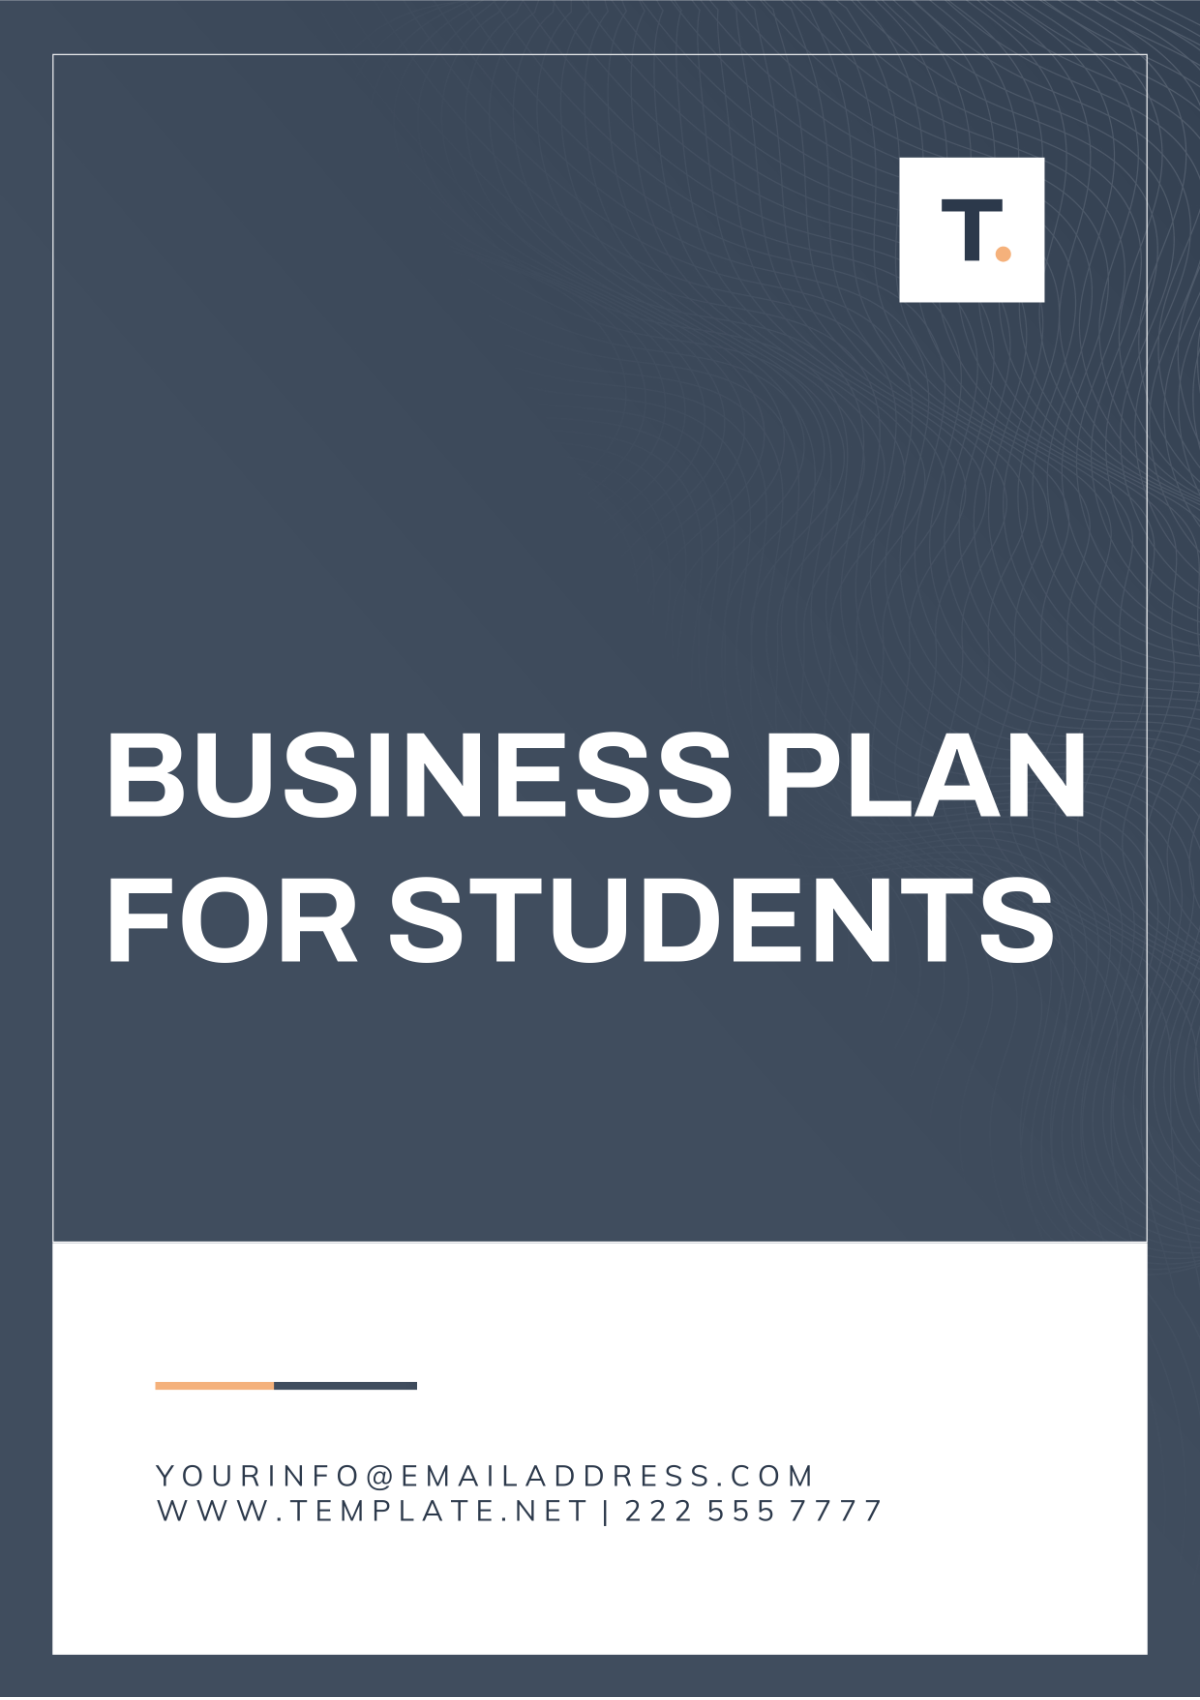 Business Plan for Students Template